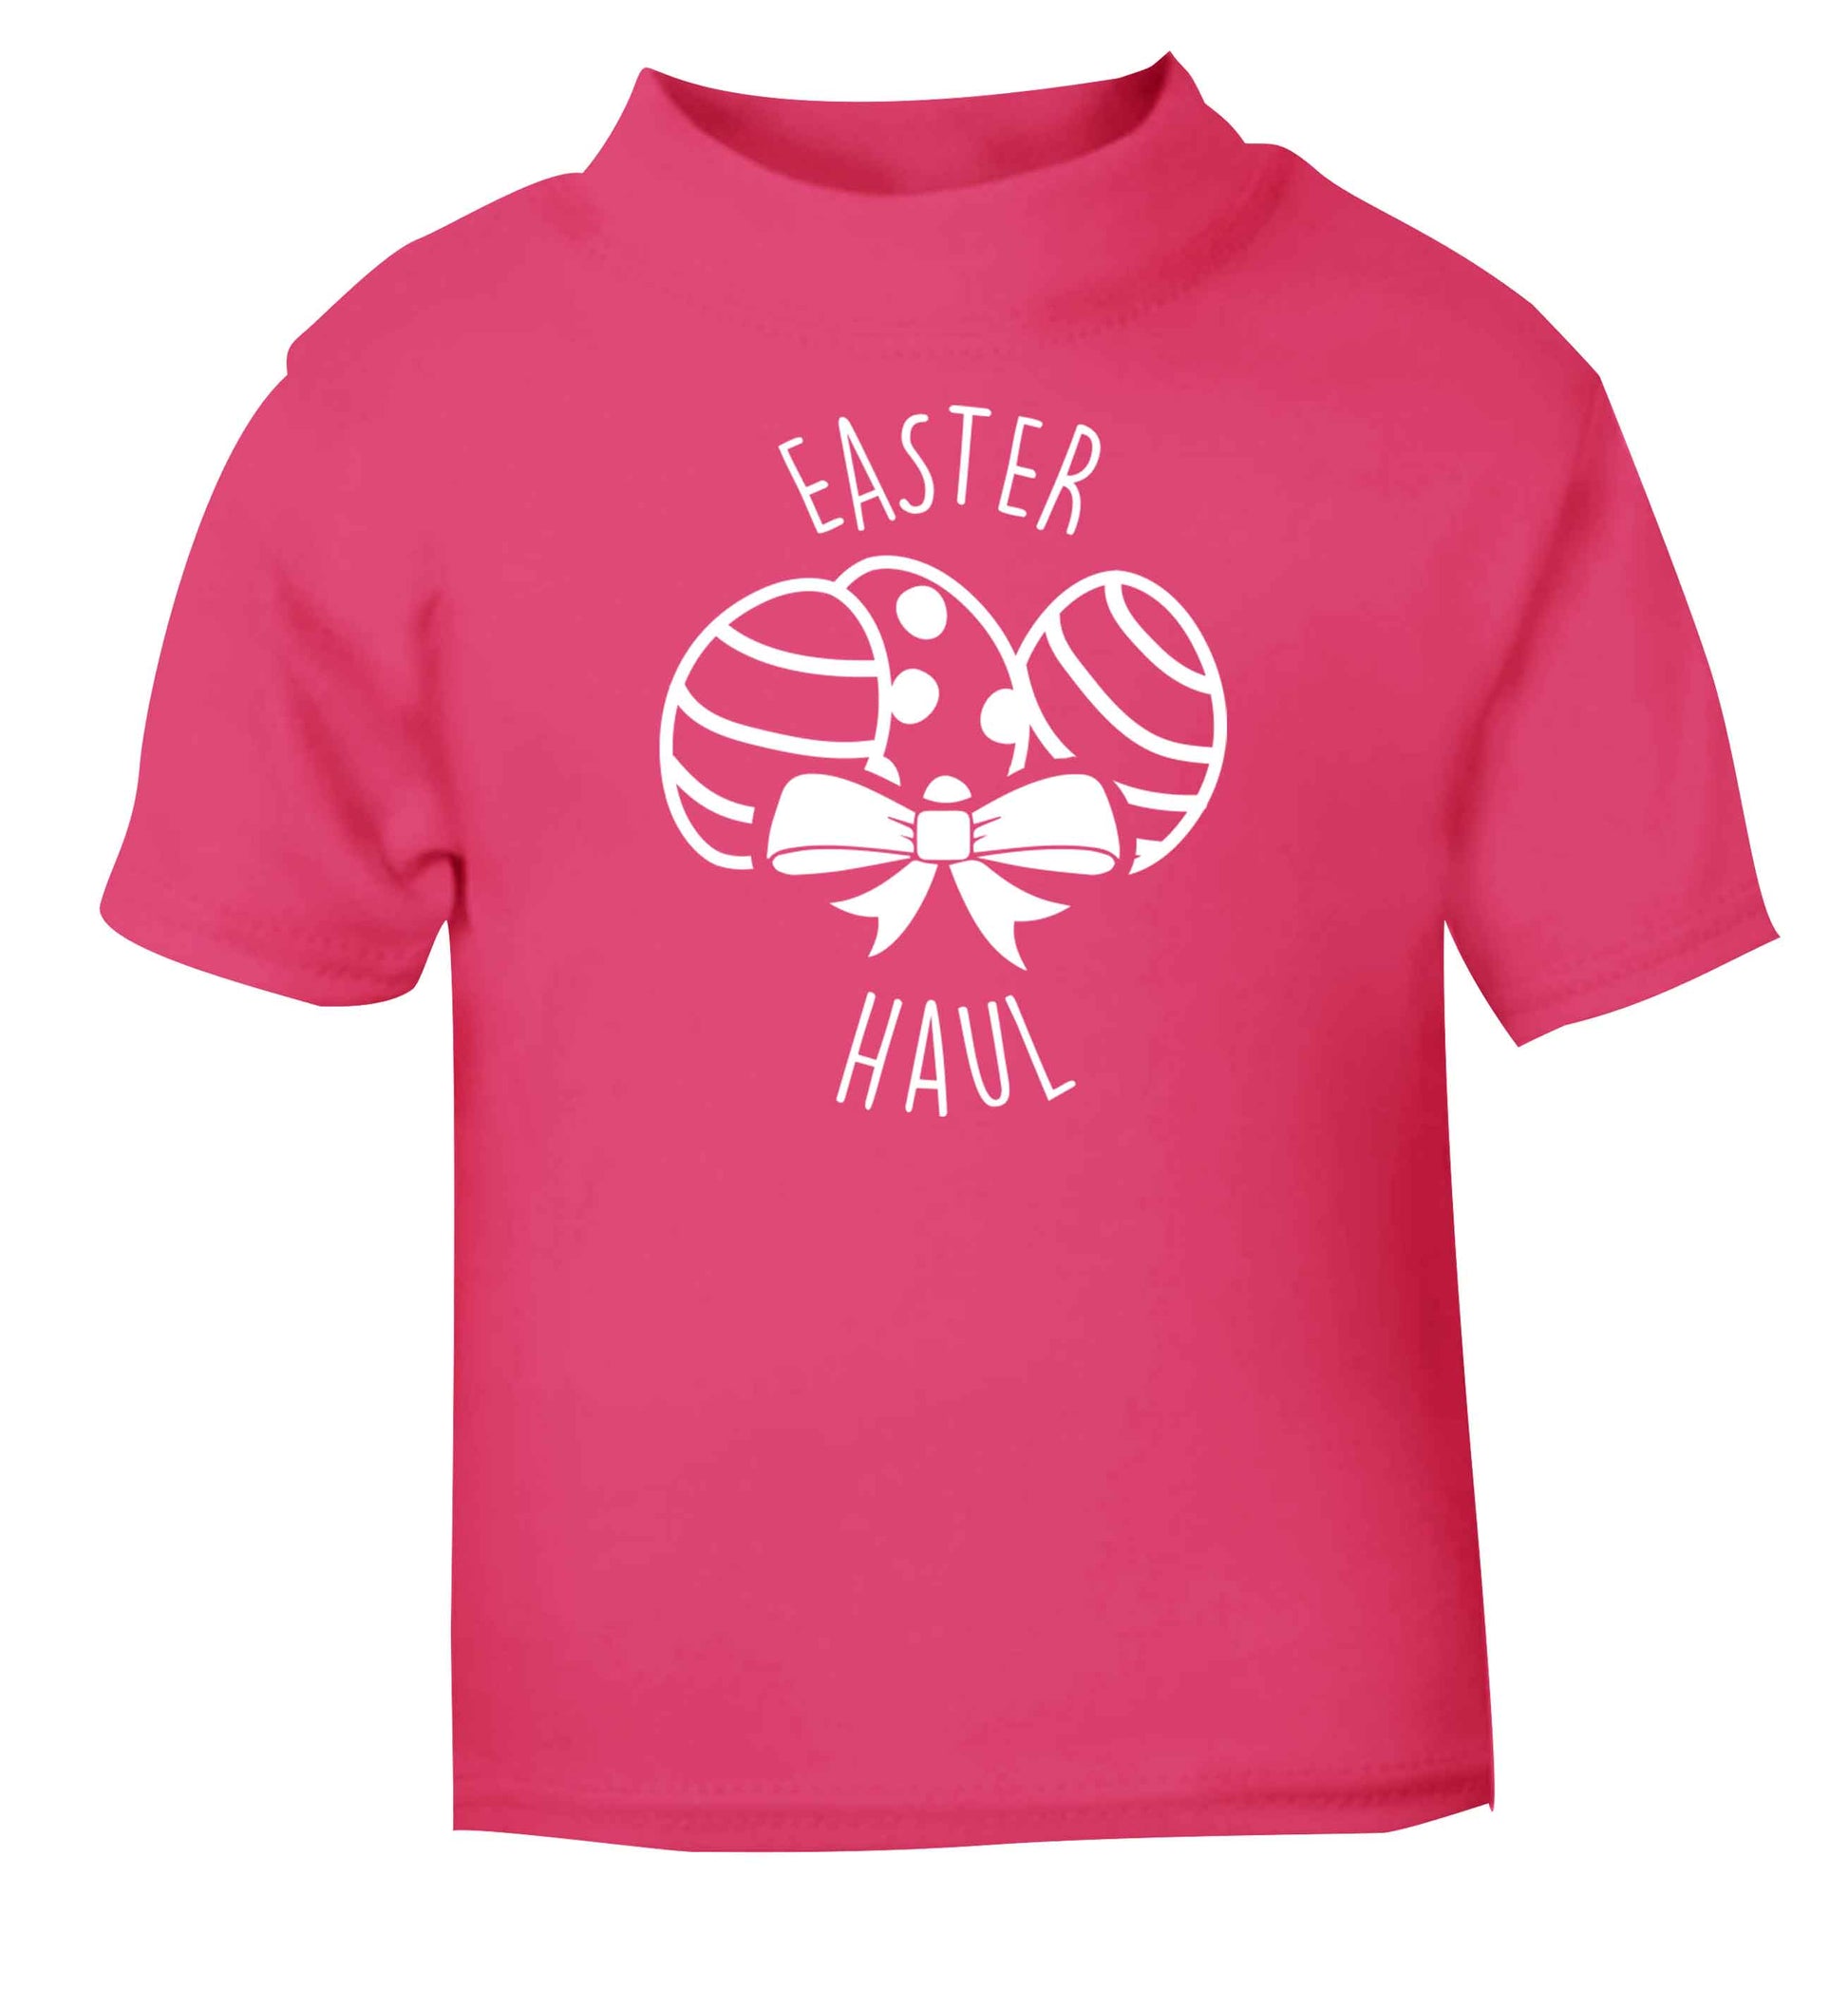 Easter haul pink baby toddler Tshirt 2 Years